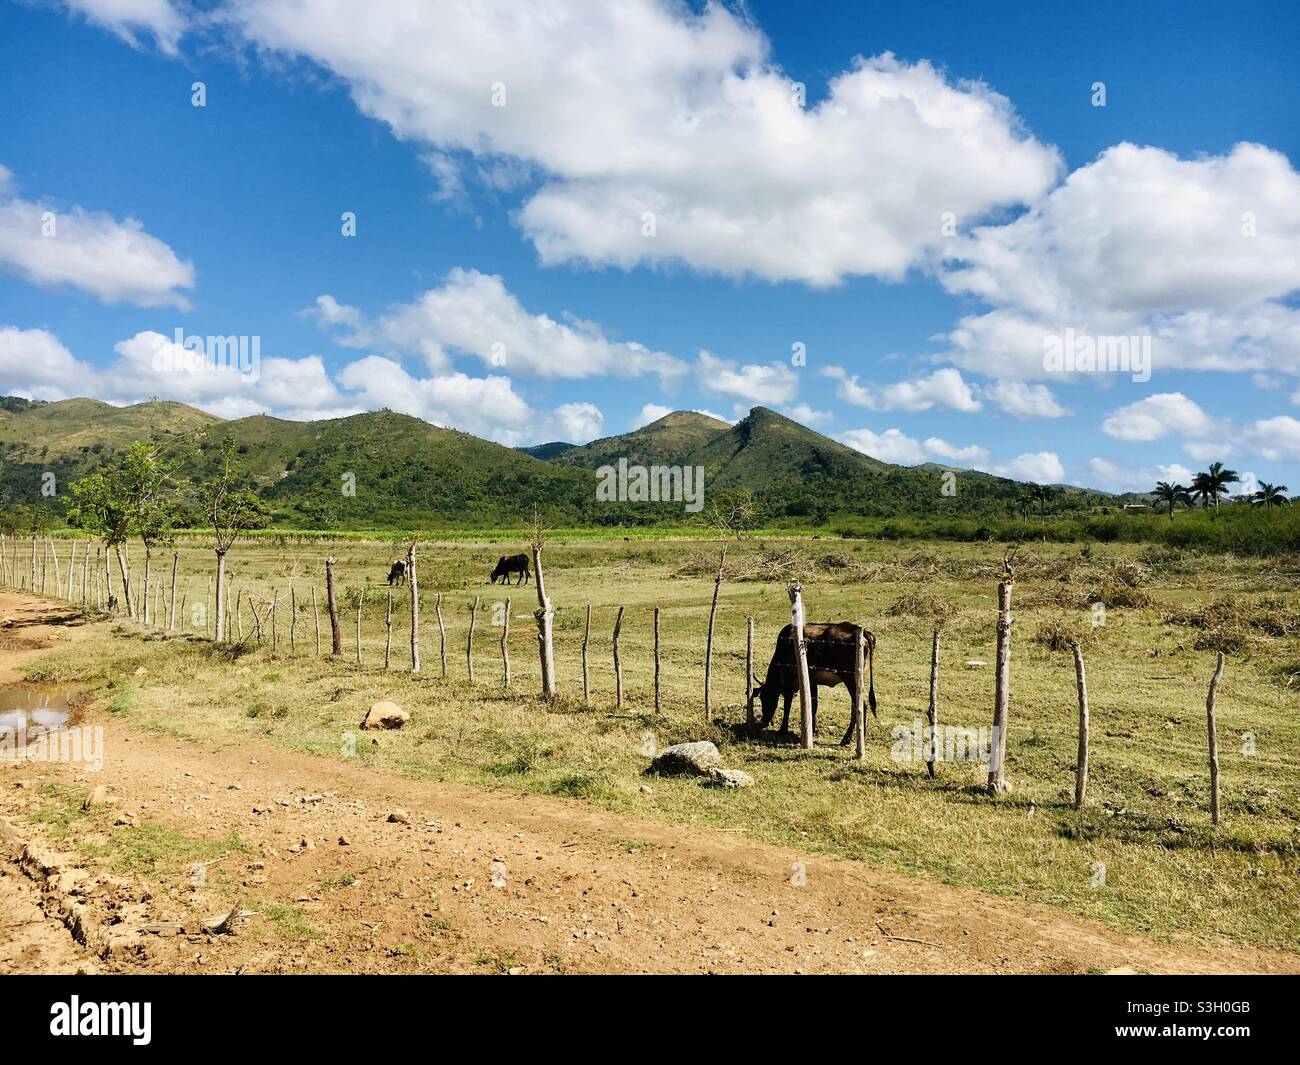 Vinales cuba countryside outdoor traveling Stock Photo